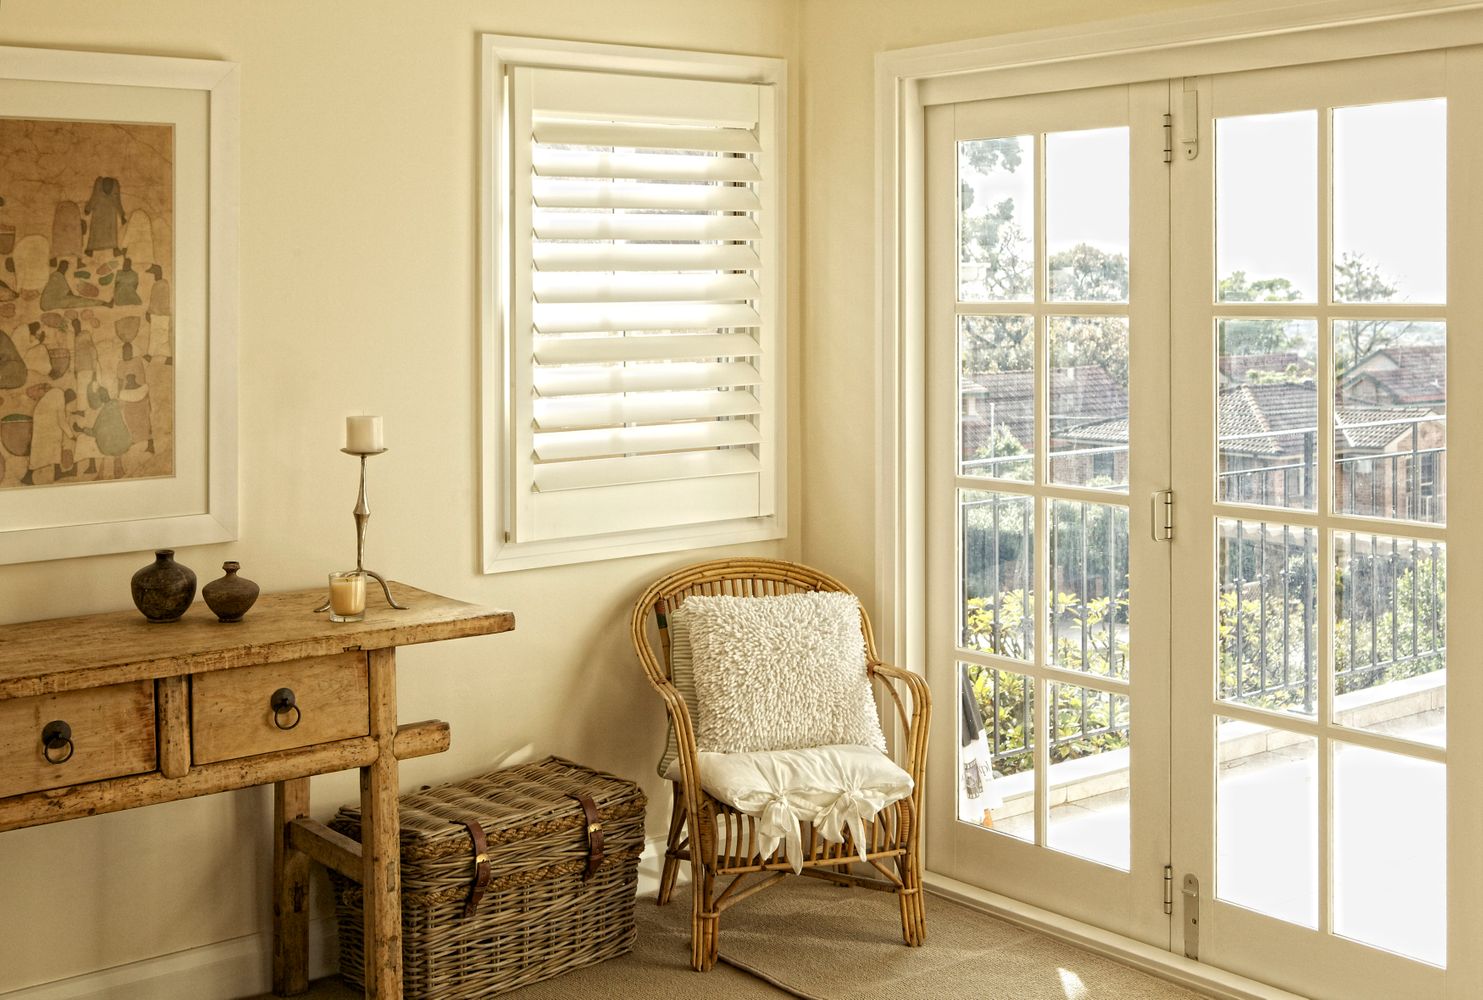 Solar Shades Cellular Blinds, Lutron shades, smart shades, Roller shades IN AUSTIN, LAGO VISTA, SPICEWOOD, BEE CAVE, LAKEWAY, DRIPPING SPRINGS, WIMBERLY, MARBLE FALLS, WEST LAKE HILLS, FREDERICKSBURG , HORSESHOE BAY, BELTON